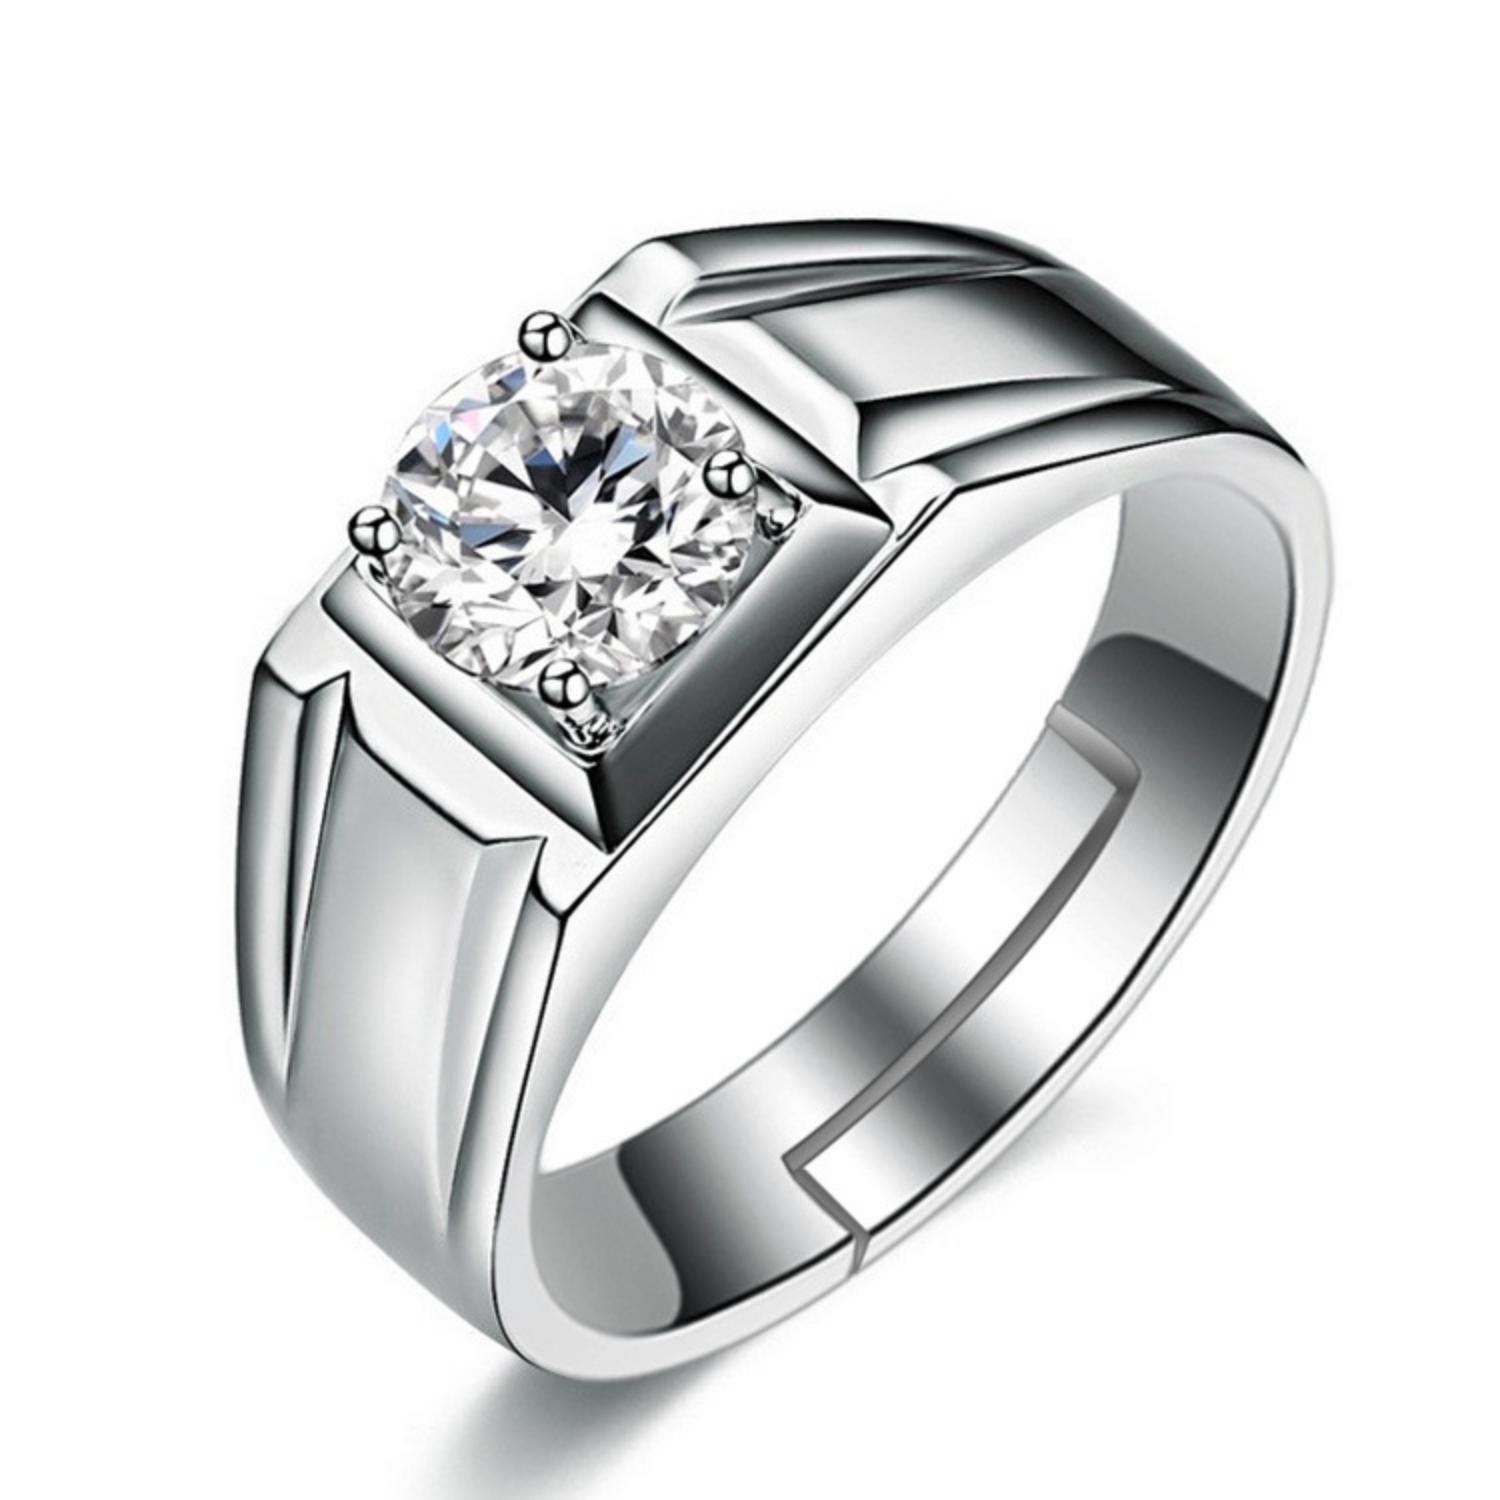 Buy Exclusive Limited Edition Sterling Silver Solitaire Adjustable ...